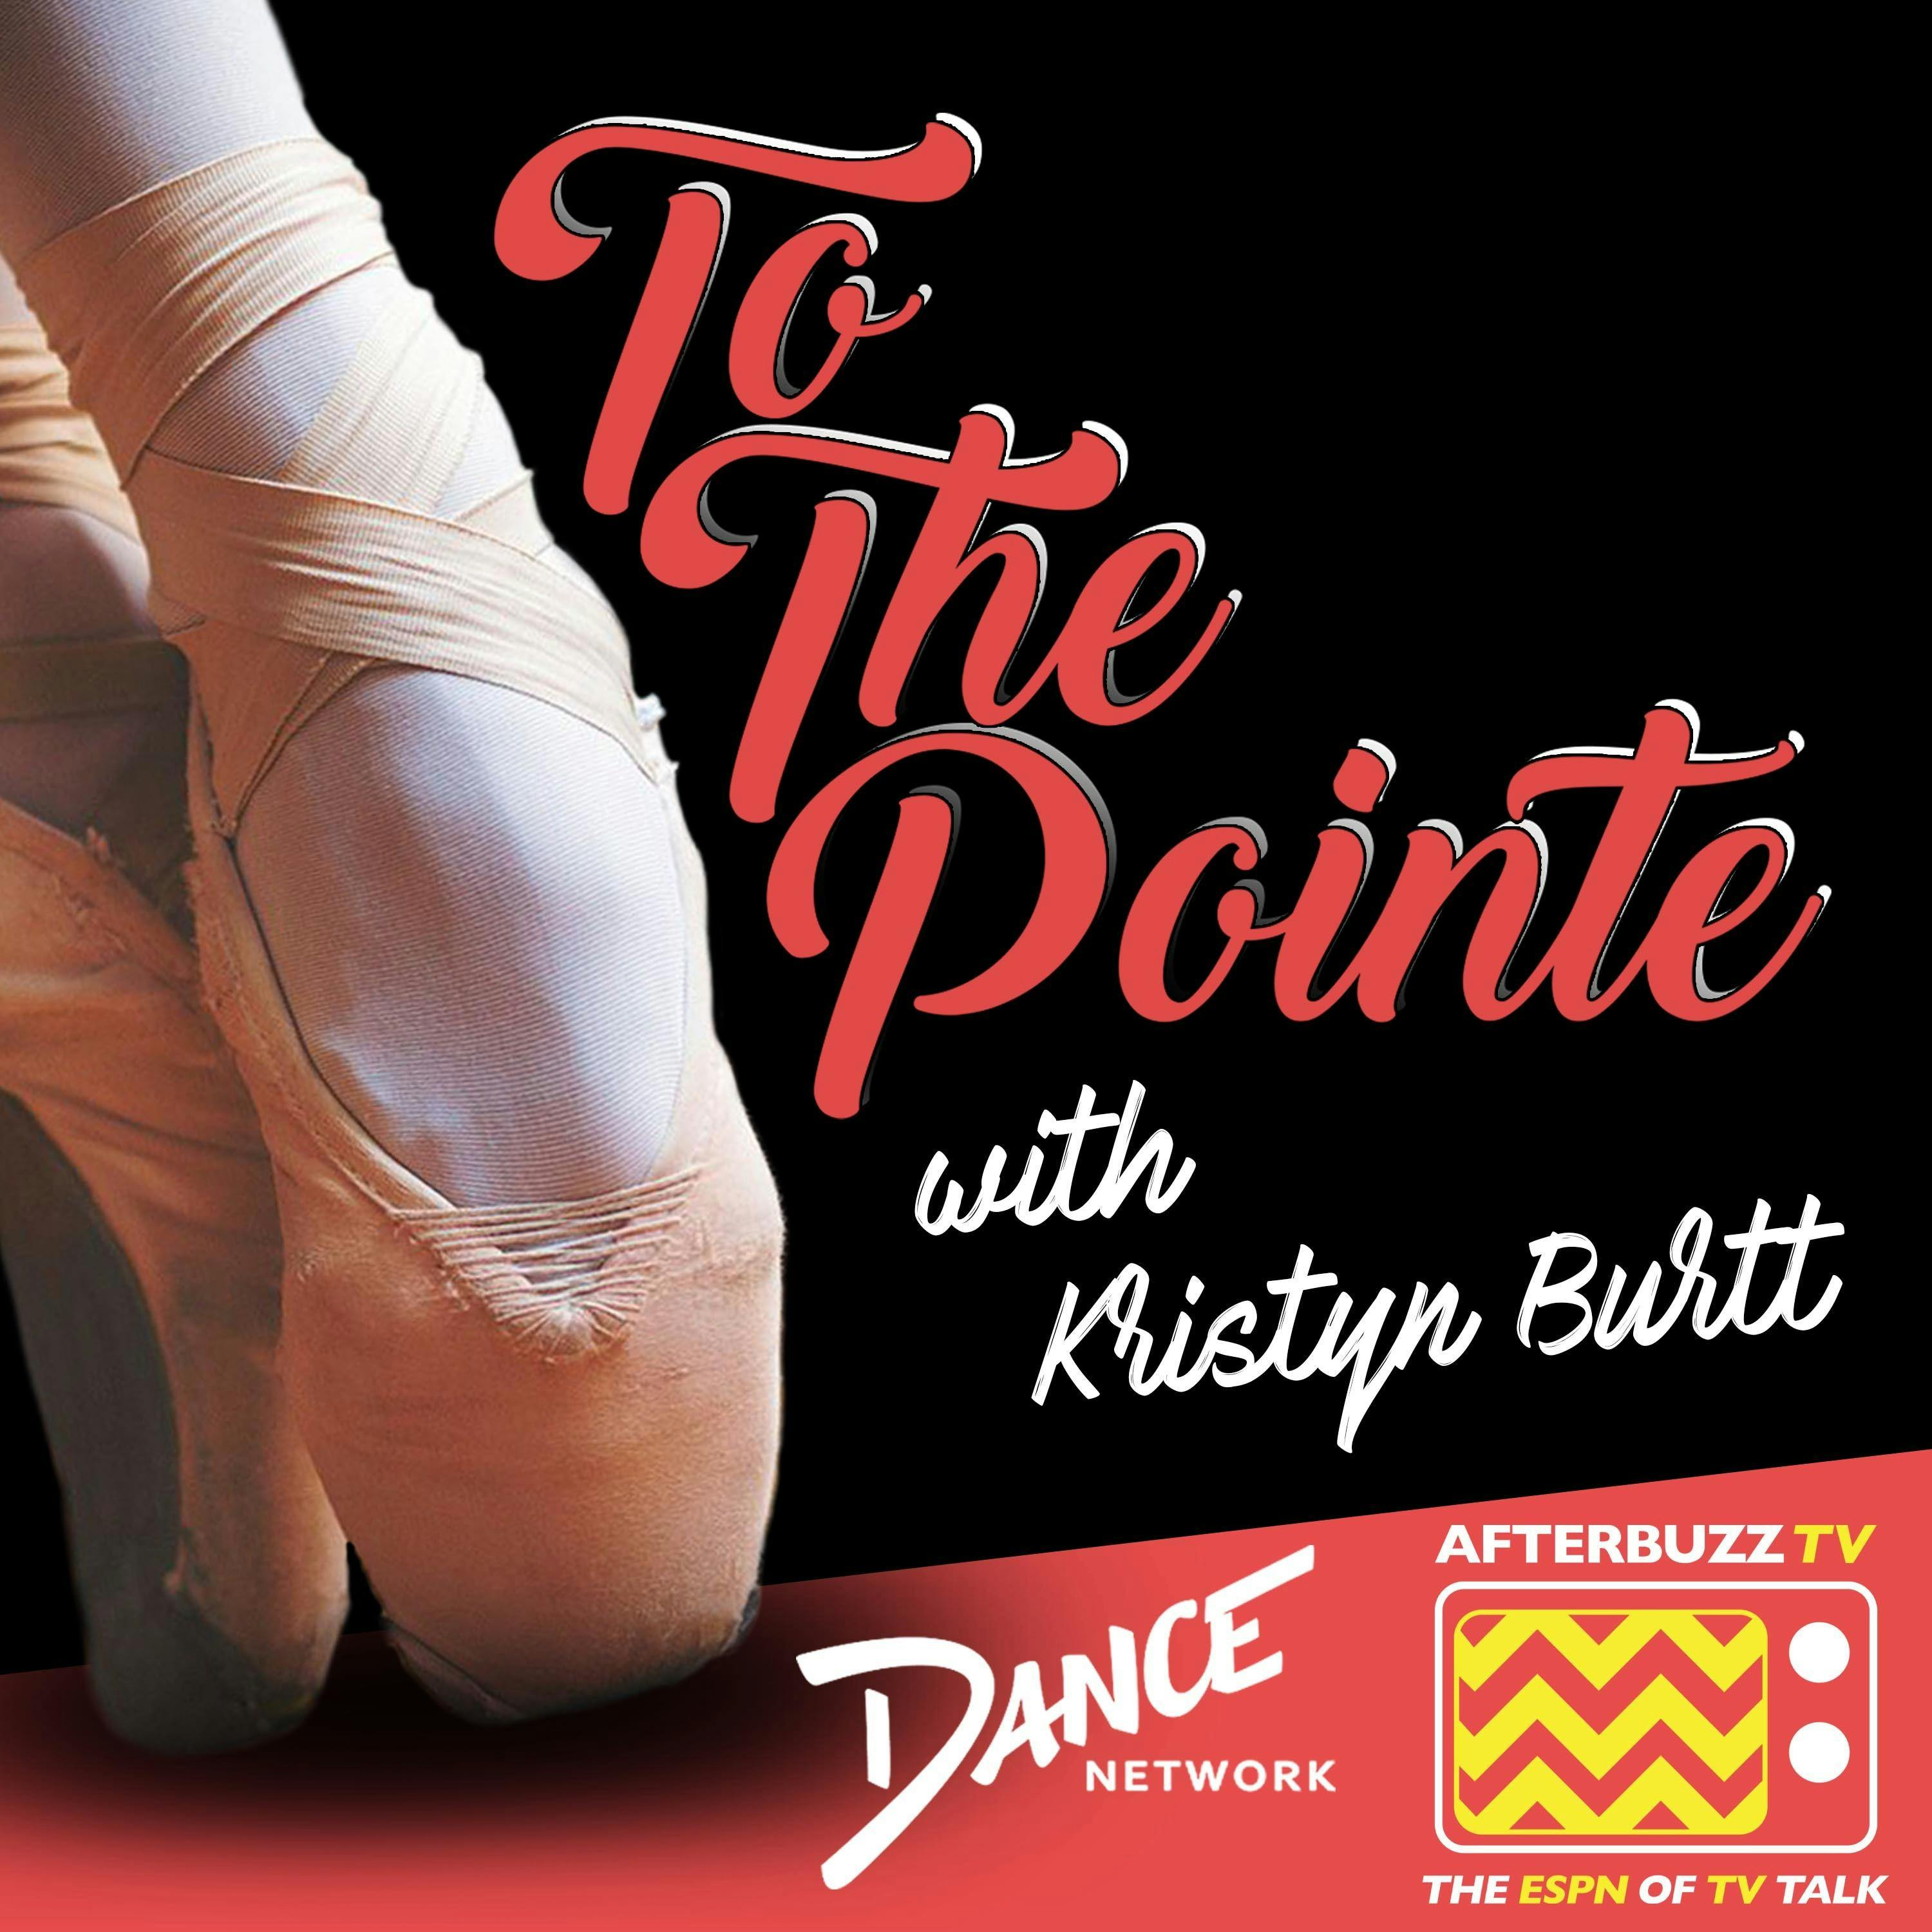 Howard Johnson, Jonah Boswell, and Rob Glover Guests on To The Pointe w/ Kristyn Burtt